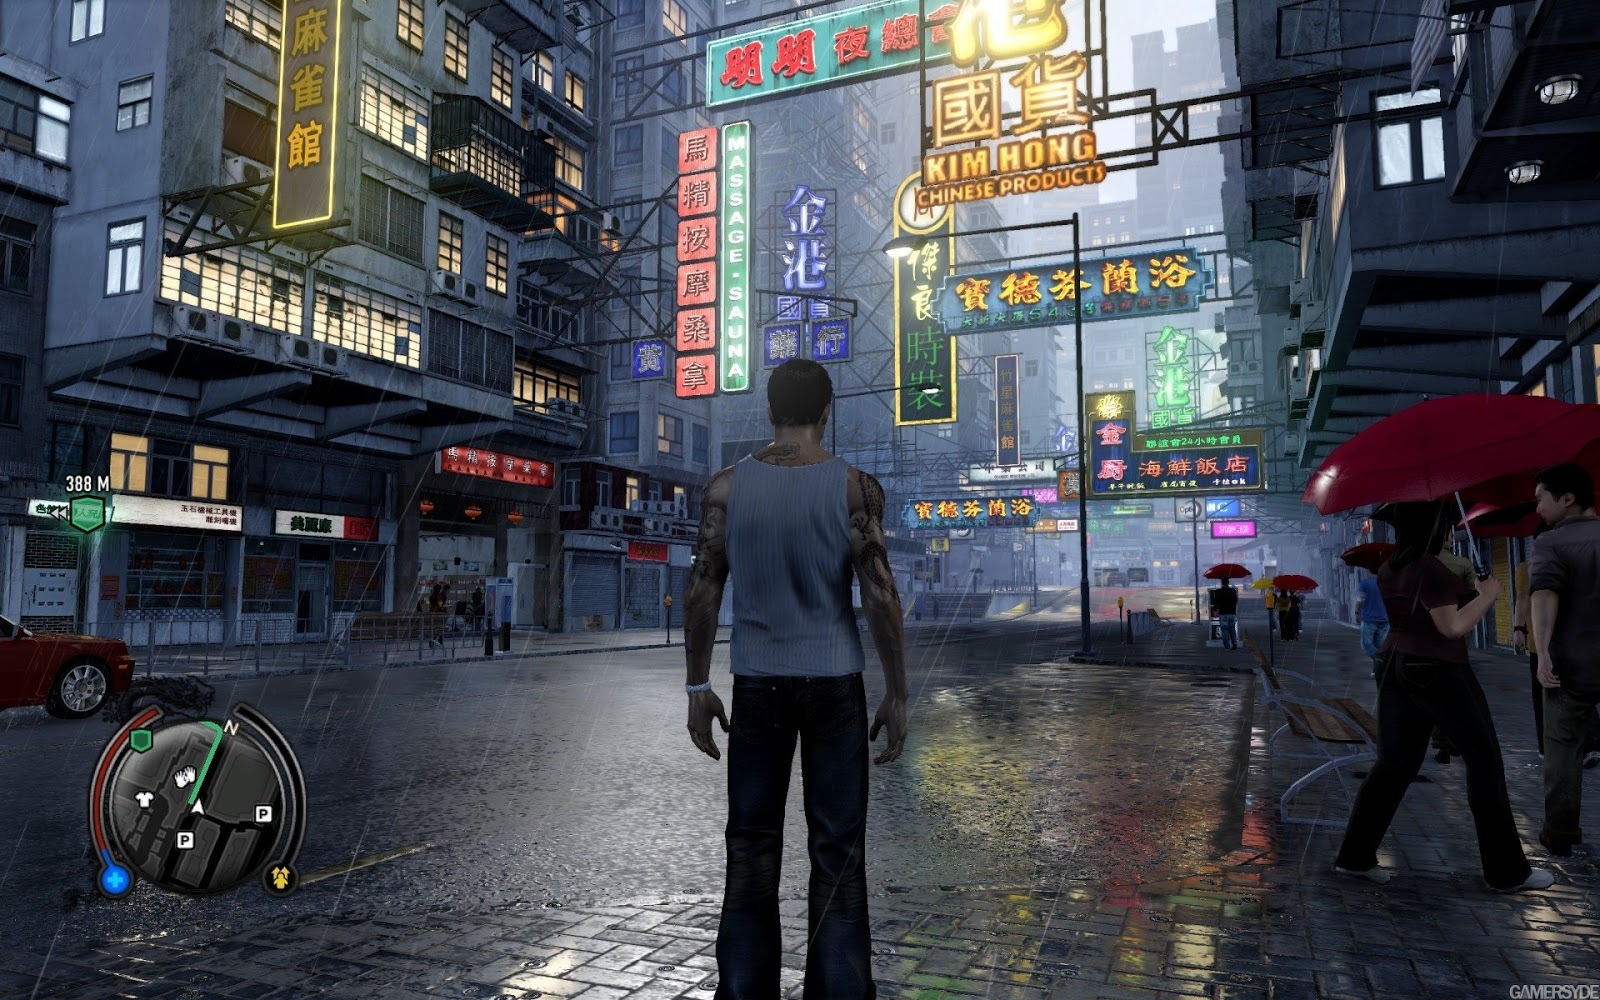 sleeping dogs pc game full version highly compressed